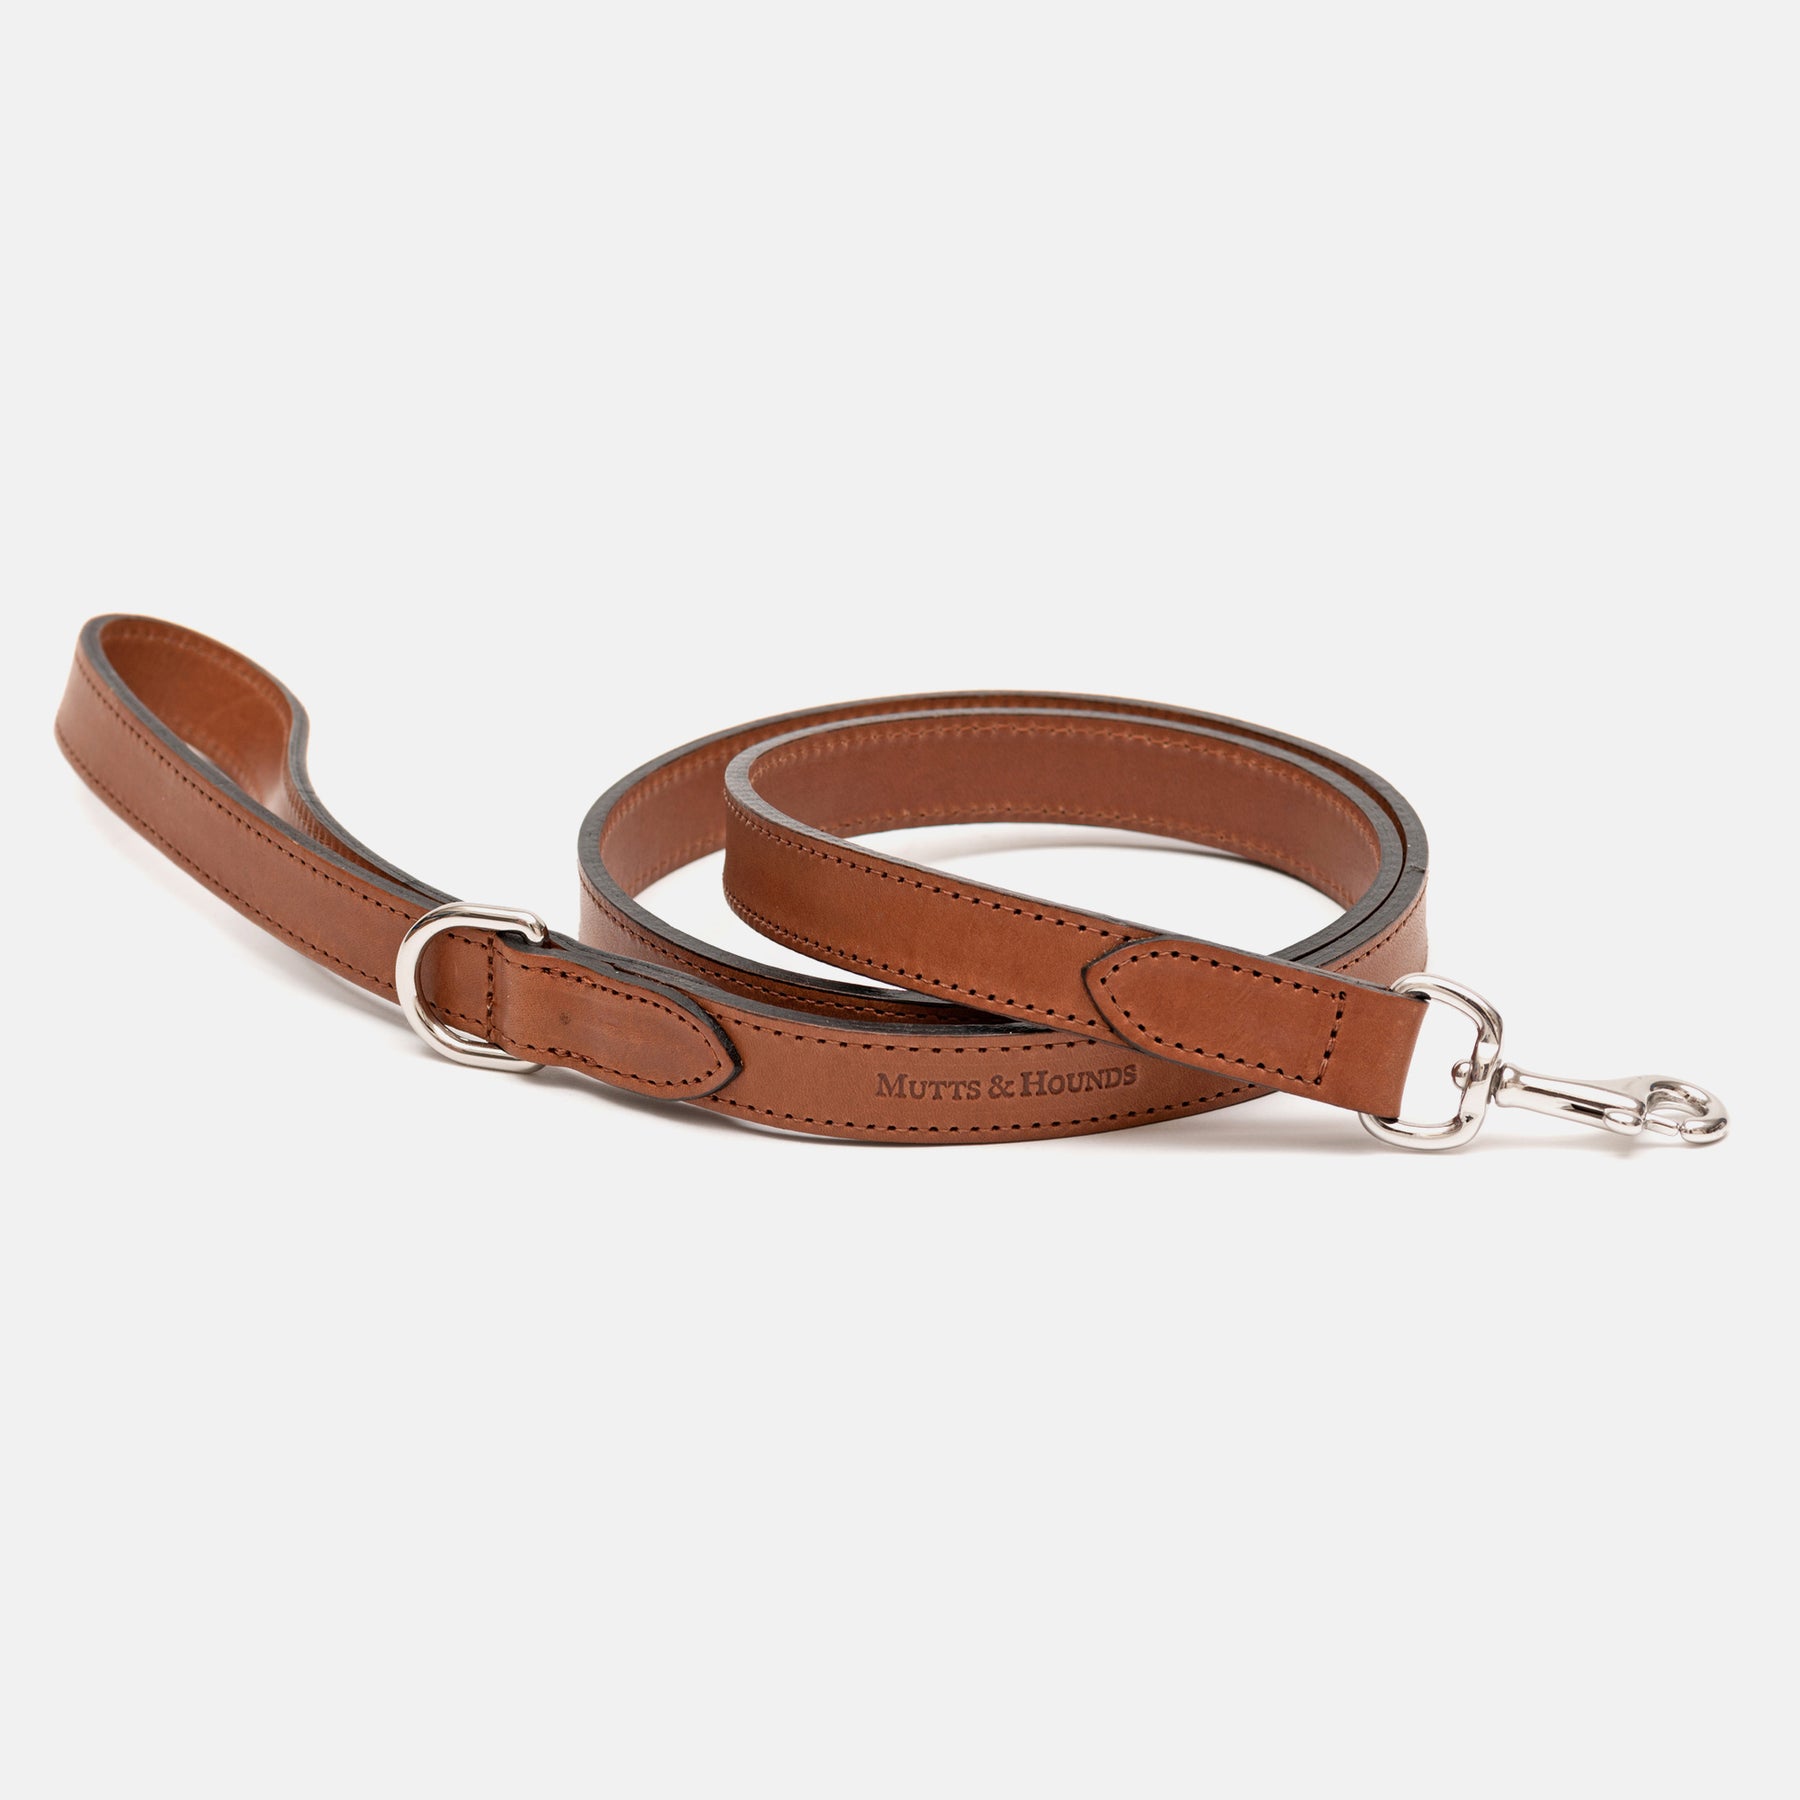 Walk | Luxury Leather Dog Collars & Leads | Designer Dog Carriers ...